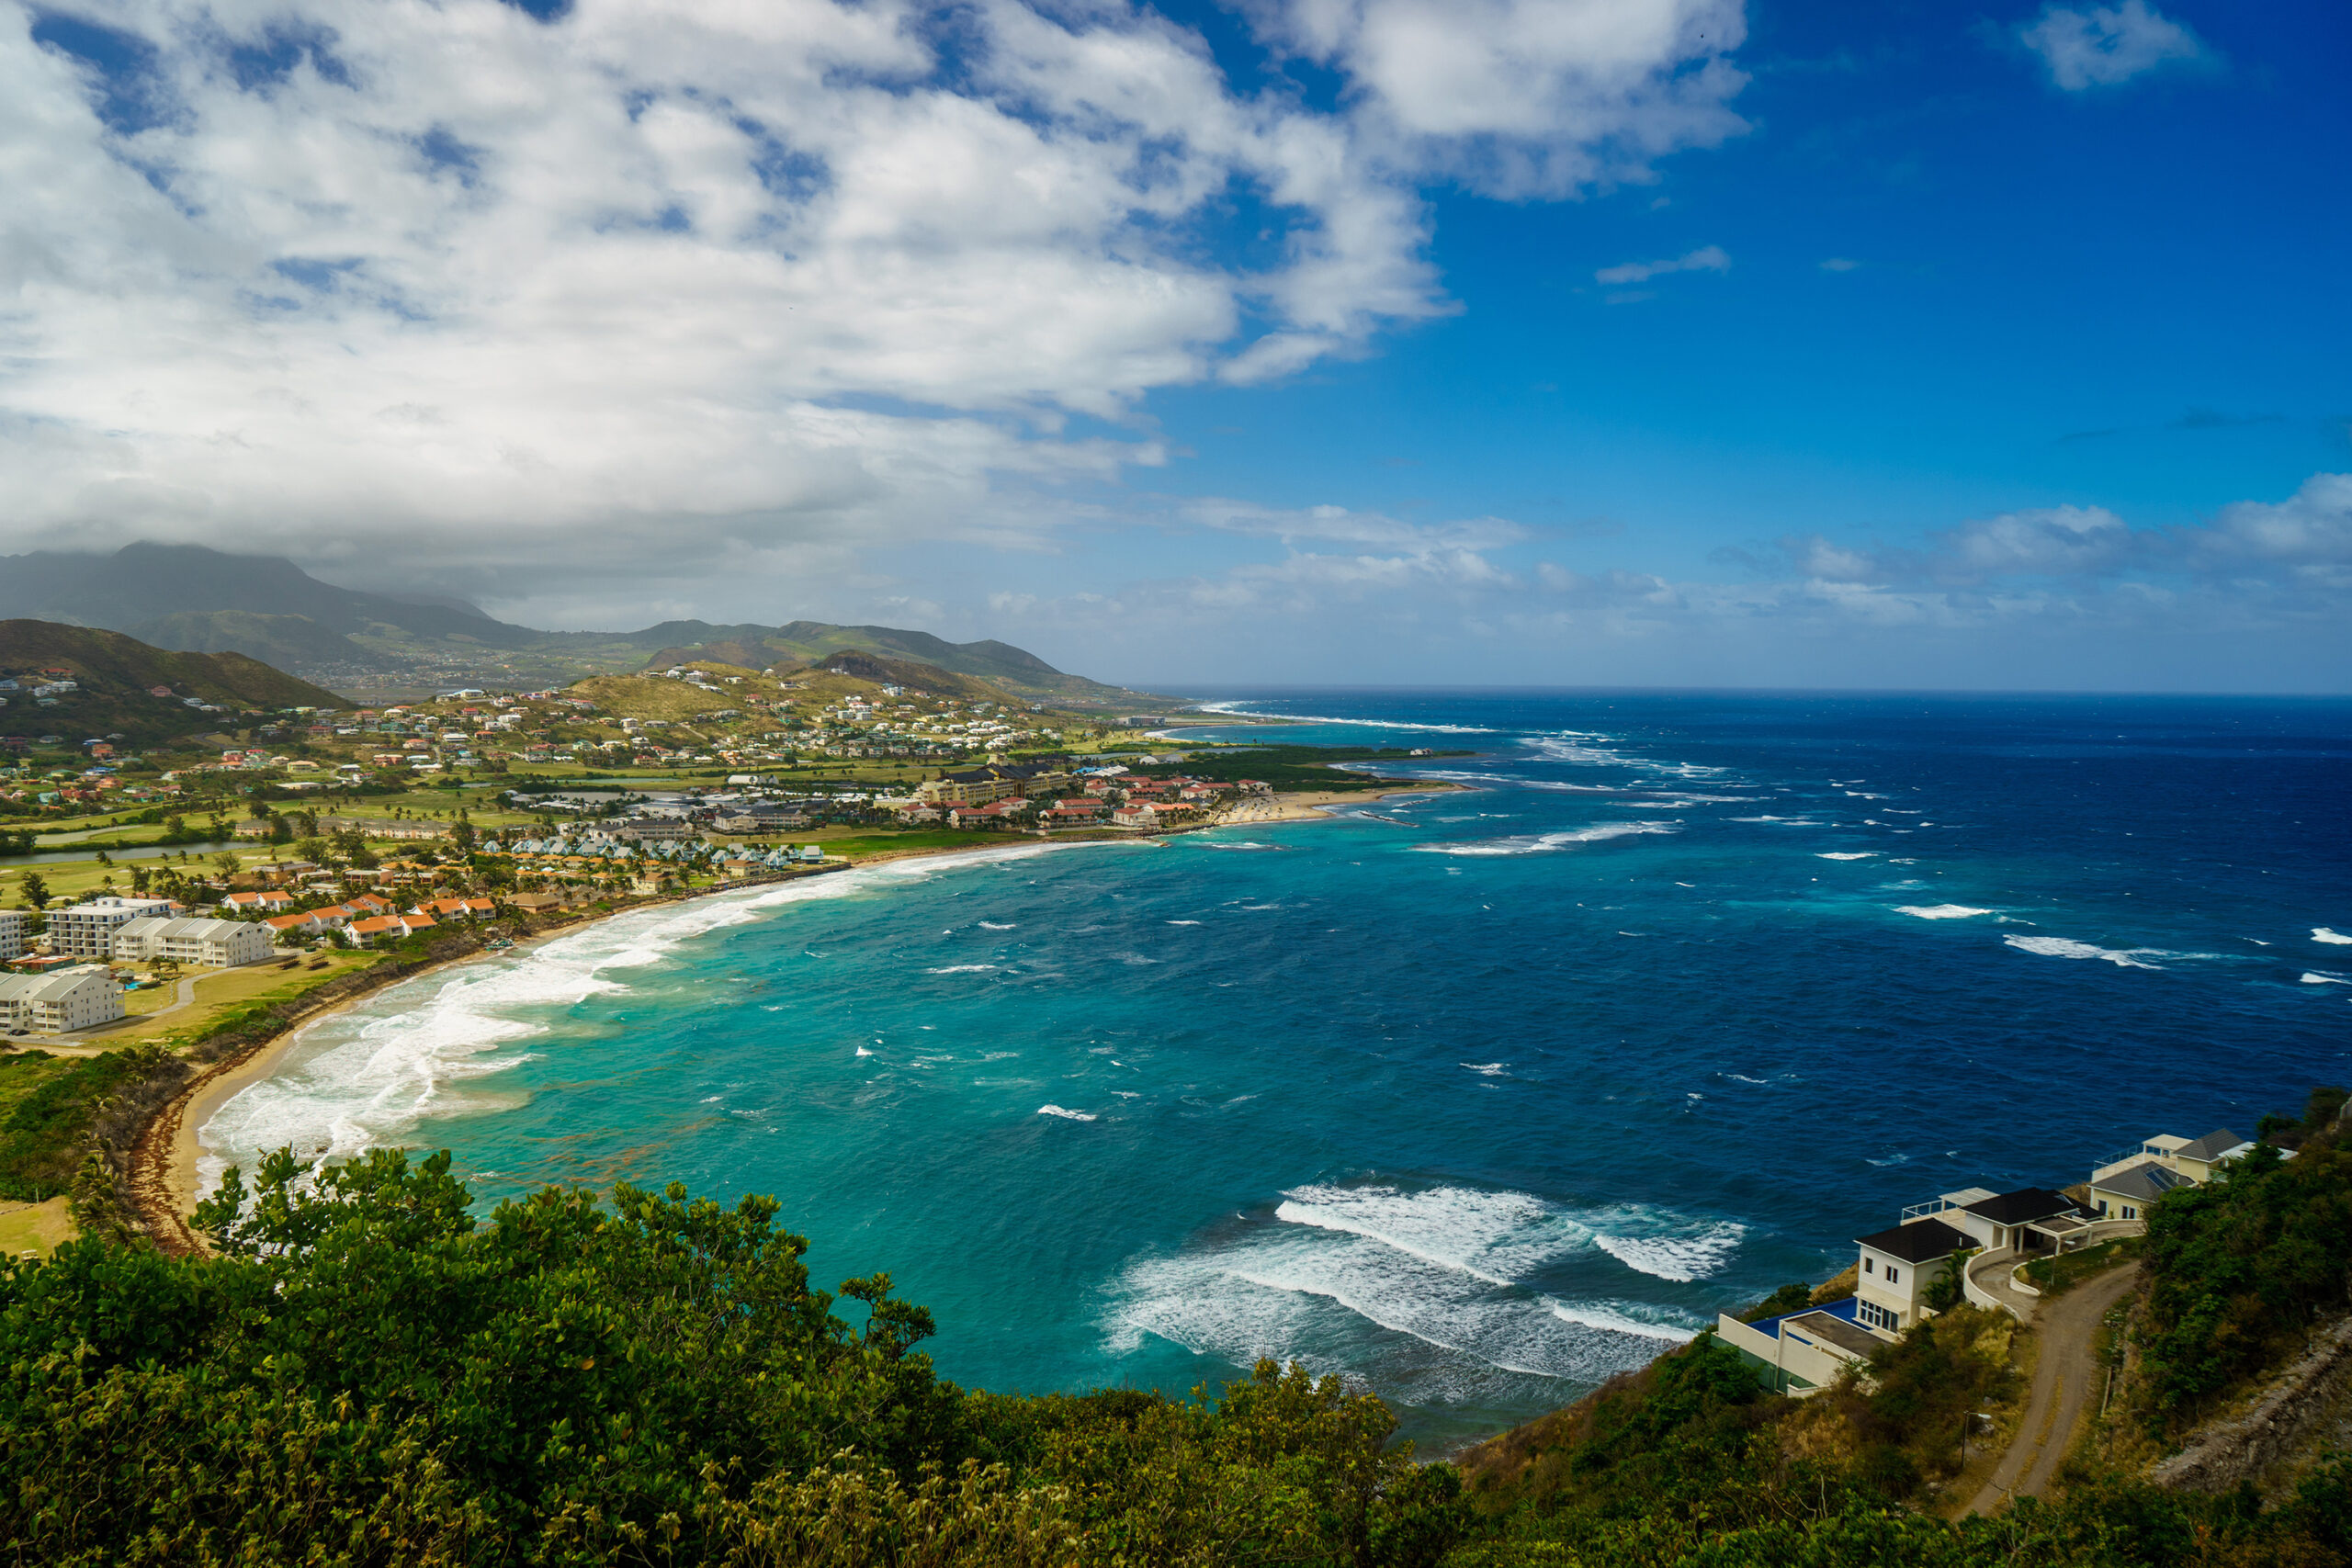 Saint Kitts and Nevis: The smallest sovereign state in the Western Hemisphere. 2560x1710 HD Wallpaper.